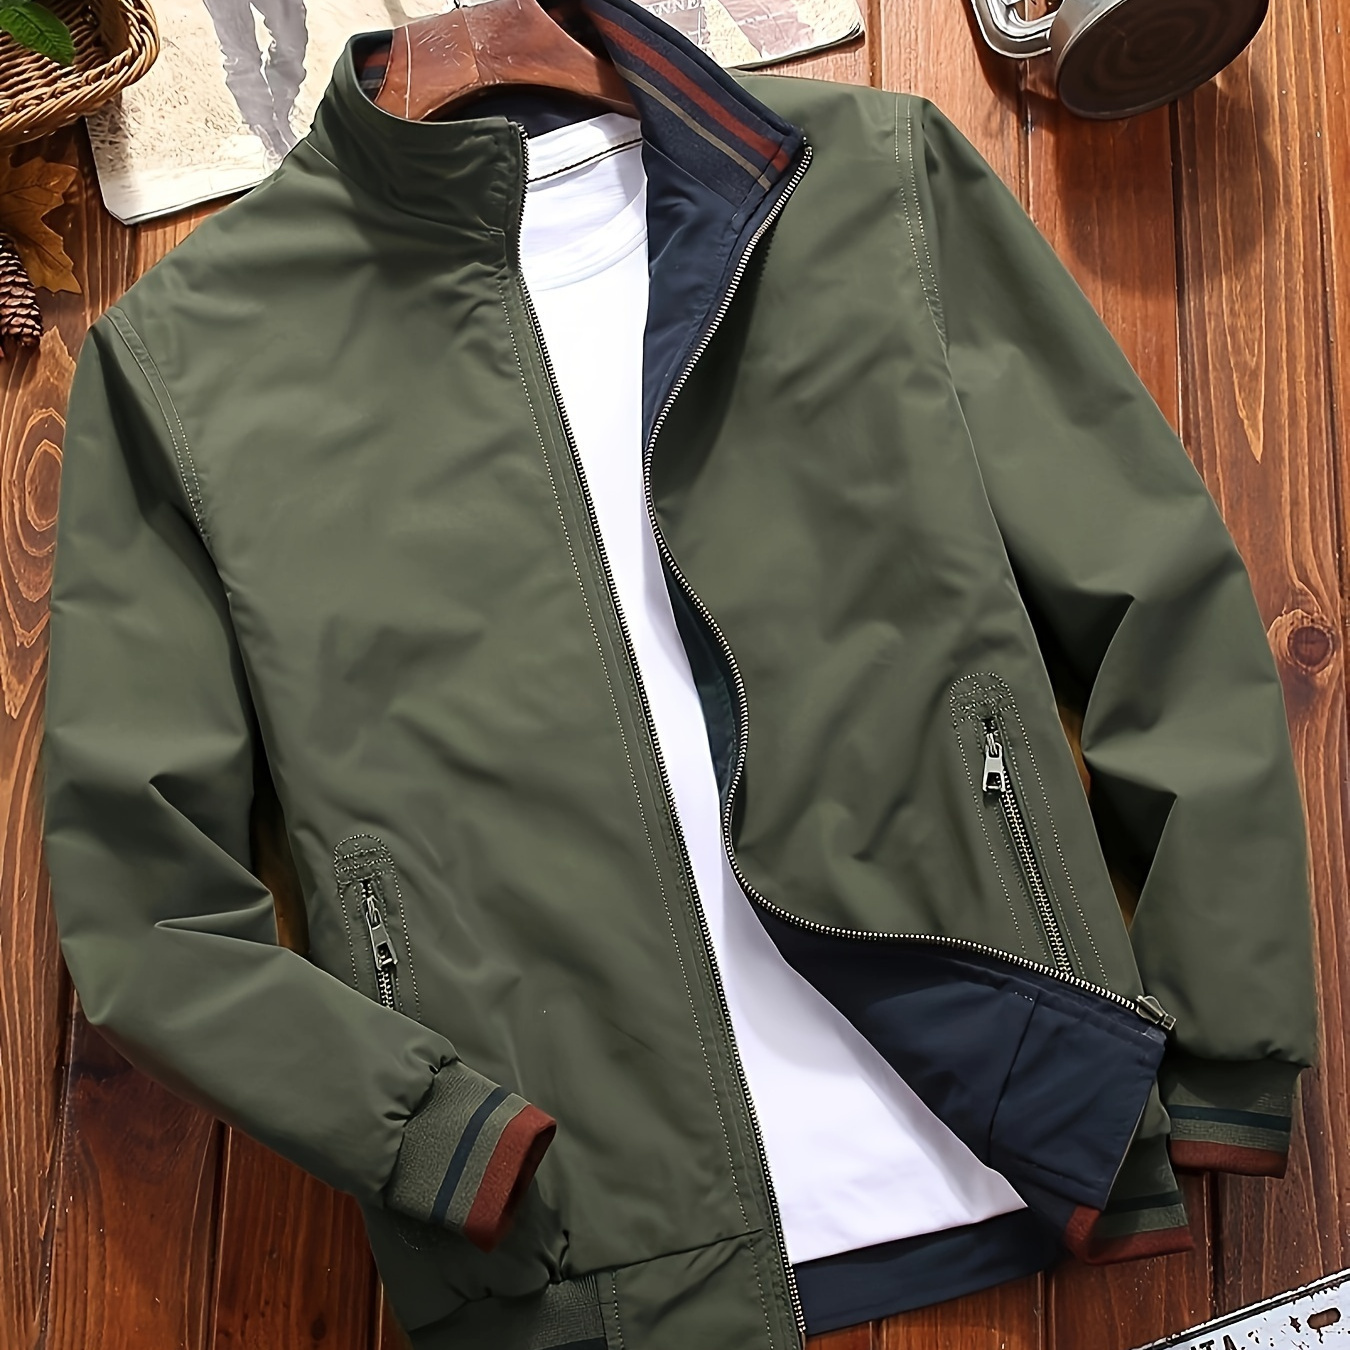 

Men's Reversible Casual Stand Collar Fashion Zip Up Jacket, Spring & Autumn Comfy Jacket